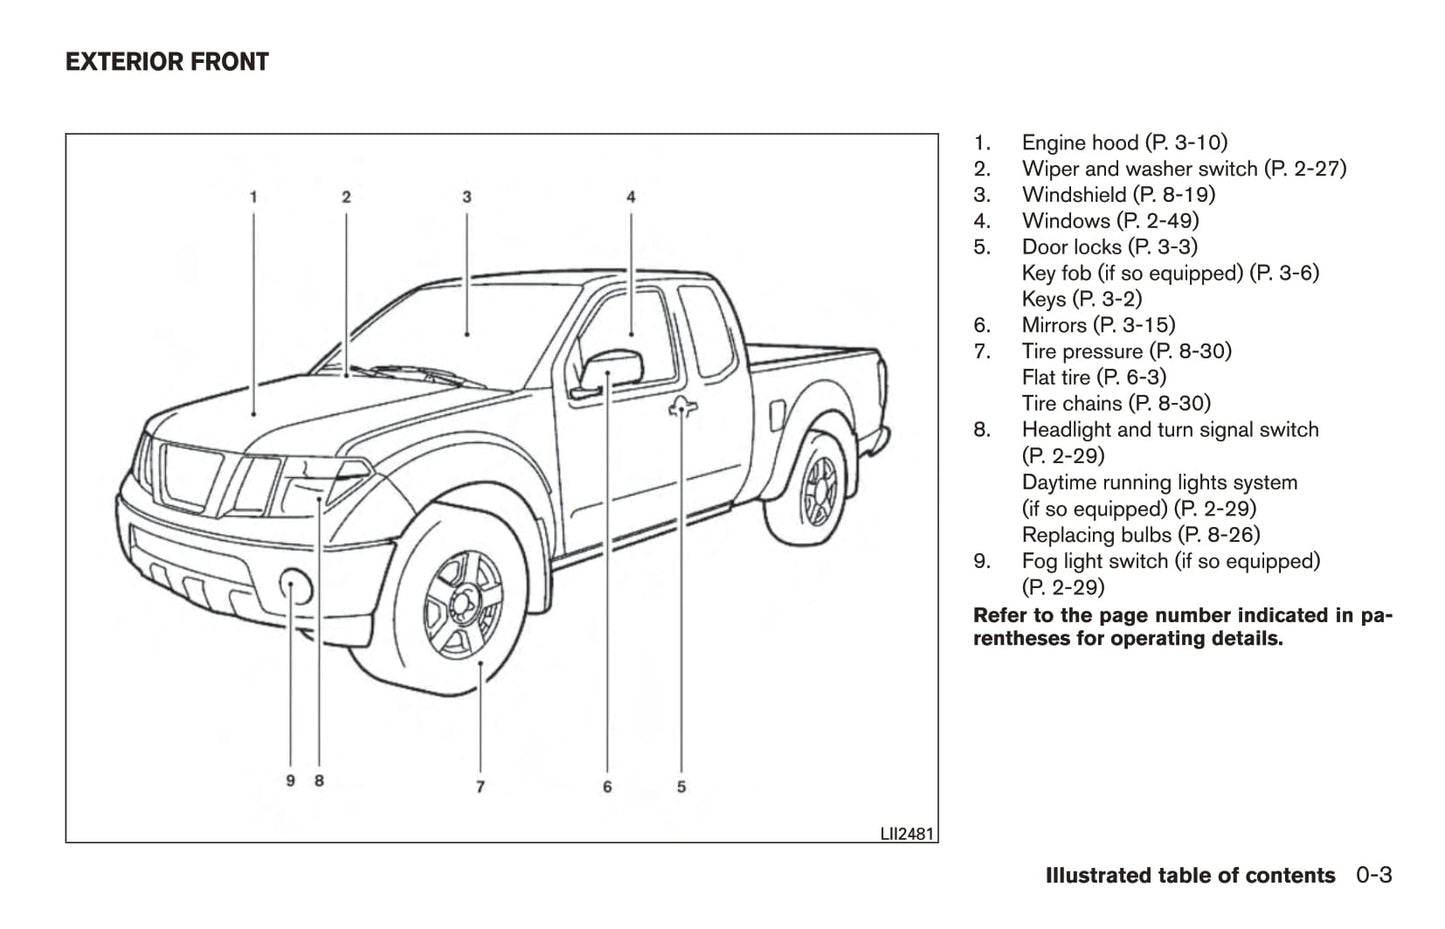 2017 Nissan Frontier Owner's Manual | English